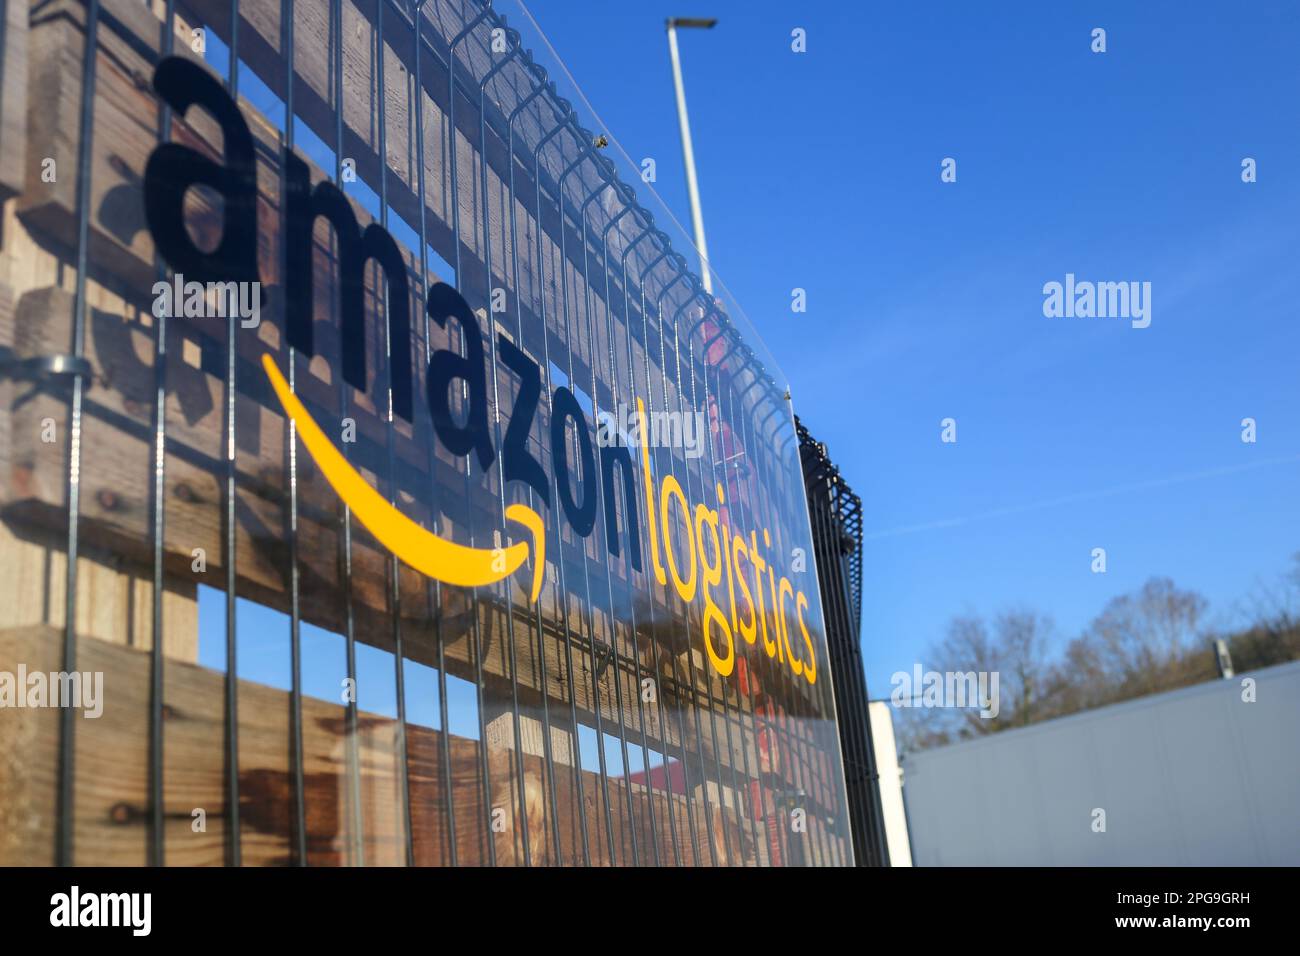 Meres, Spain, 21th March, 2023: Amazon Logistics sign during Amazon final layoff of another 9,000 workers on March 21, 2023, in Meres, Spain. Credit: Alberto Brevers / Alamy Live News Stock Photo